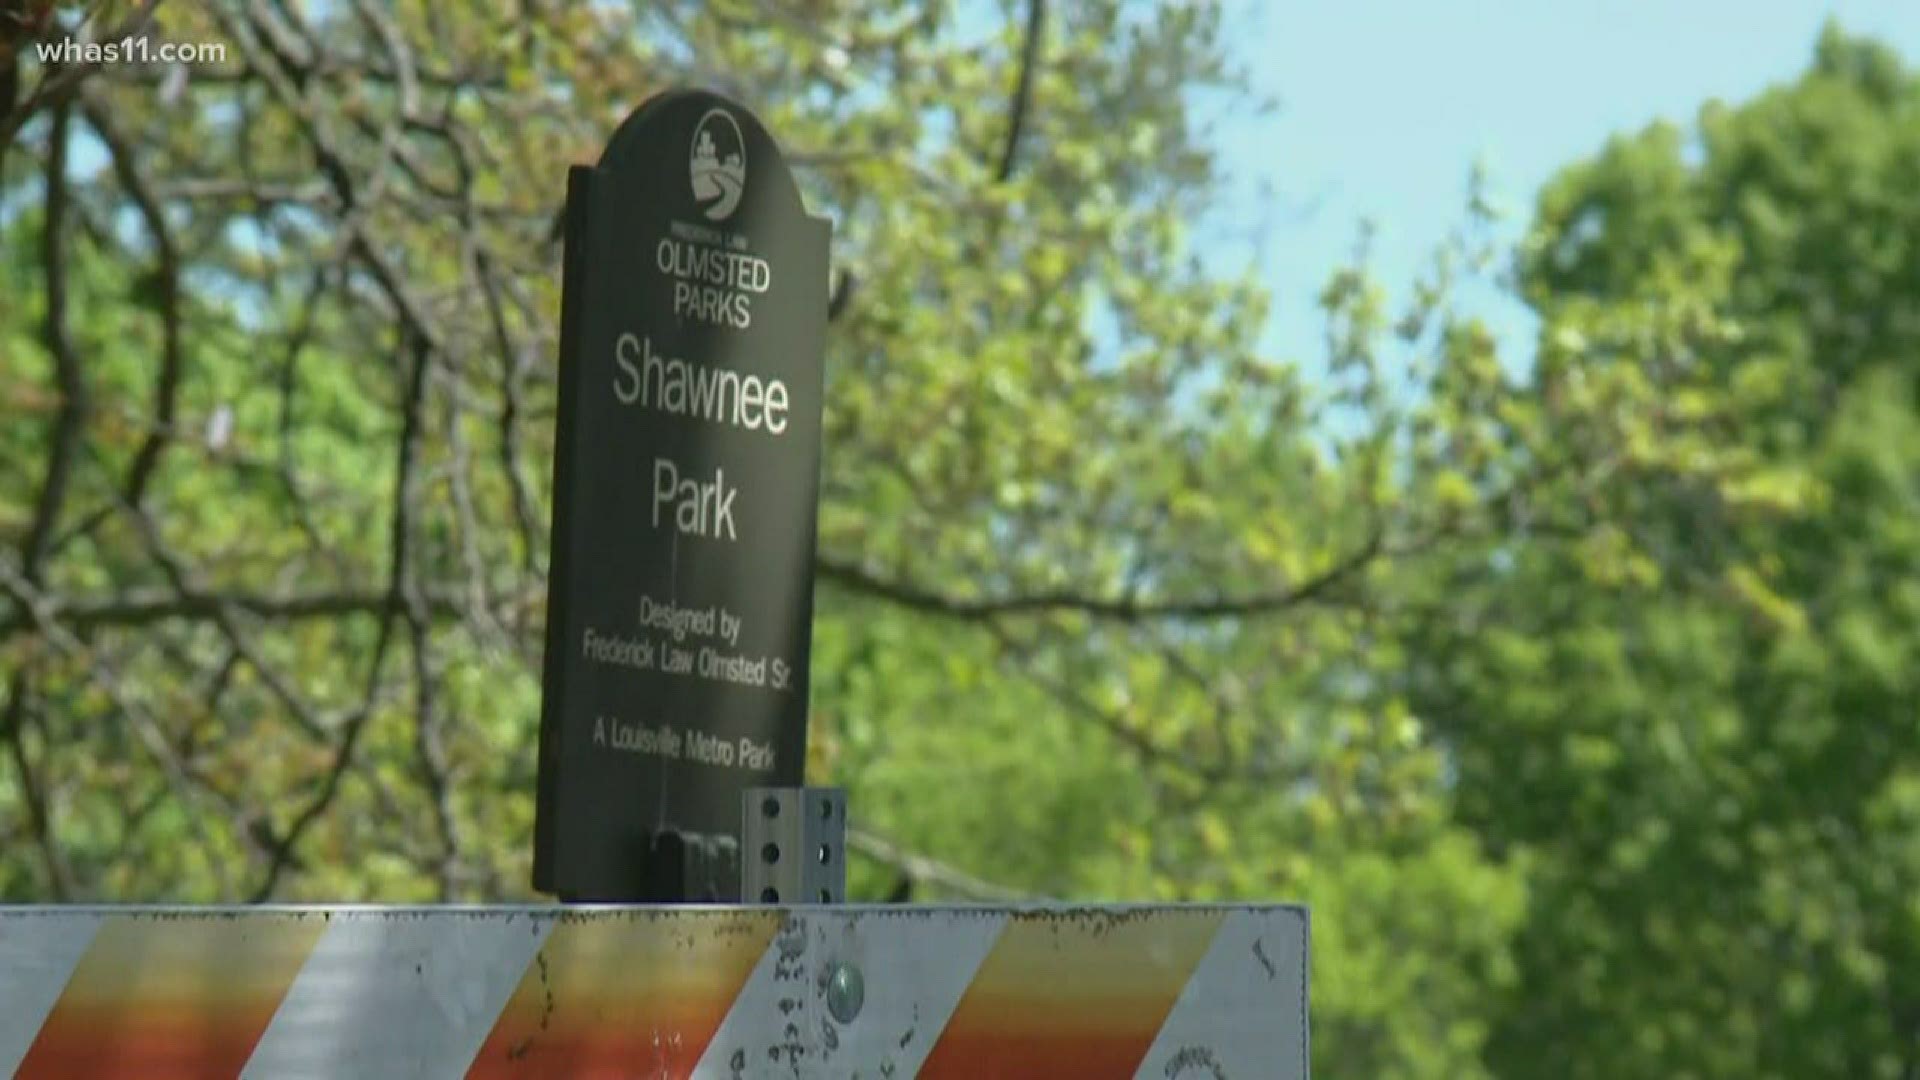 COVID-19 testing at Shawnee Park is open to anyone. The state selected the area to make testing available to African Americans due to disparities seen in the U.S.